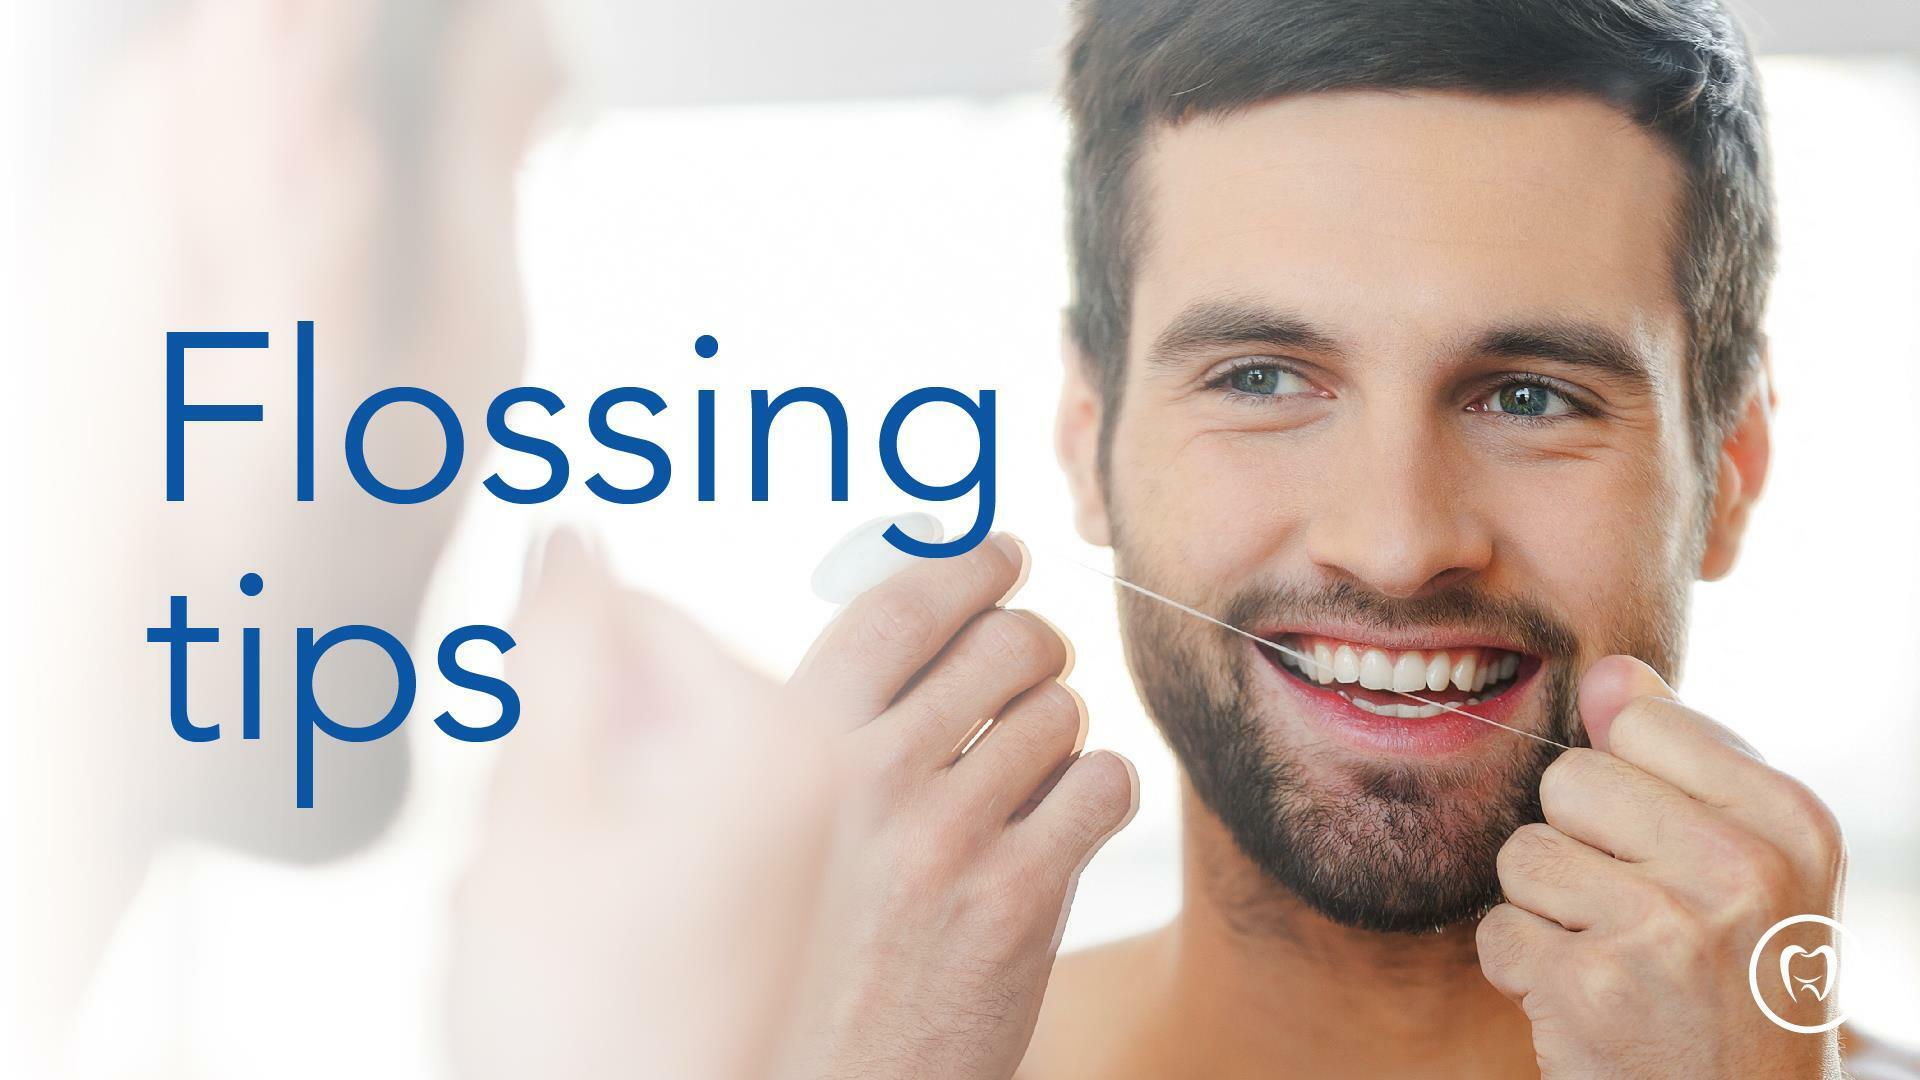 Flossing tips